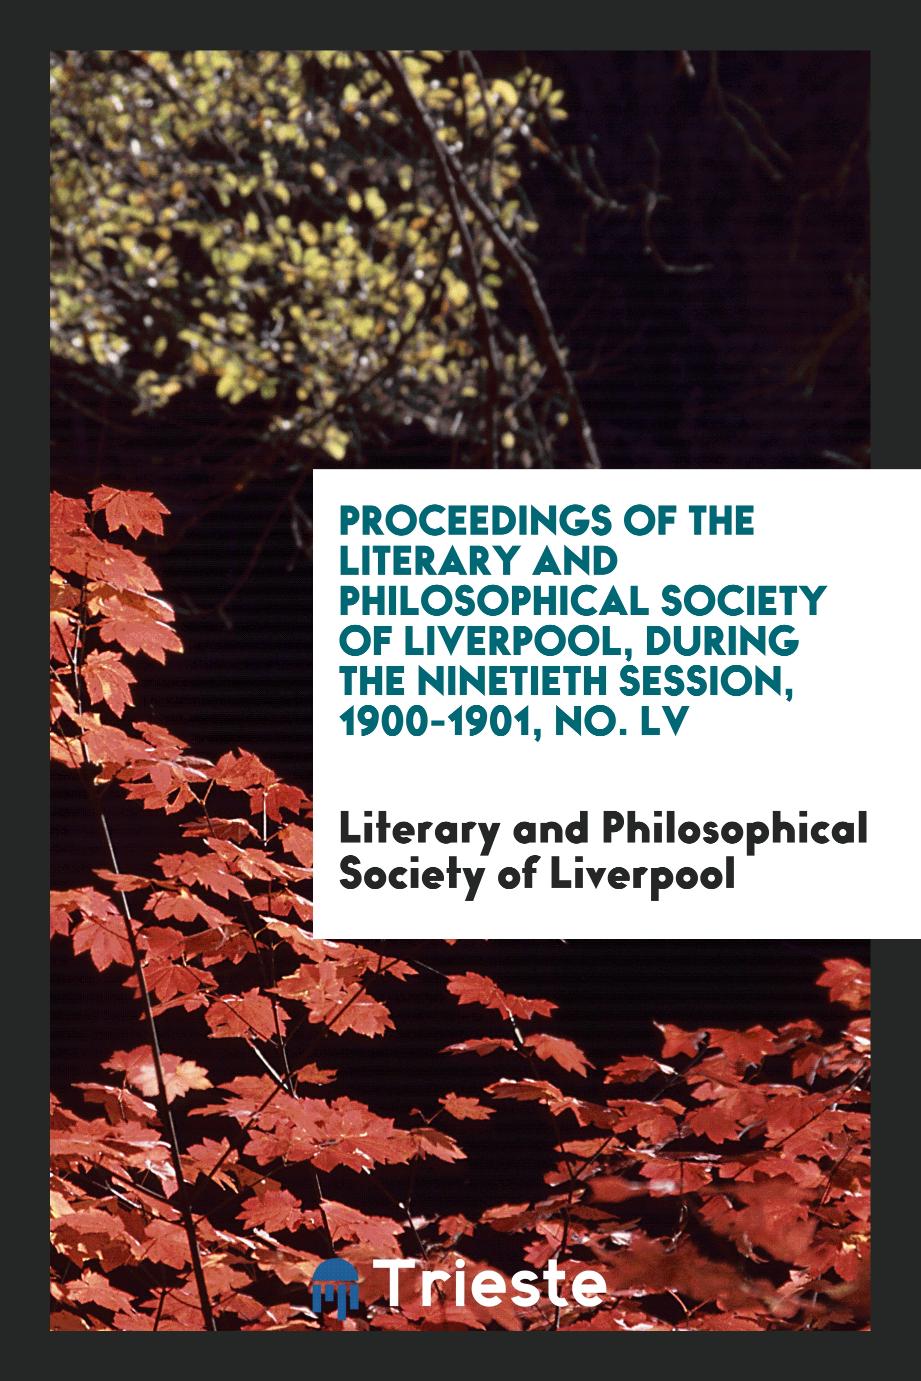 Proceedings of the Literary and Philosophical Society of Liverpool, during the Ninetieth Session, 1900-1901, No. LV